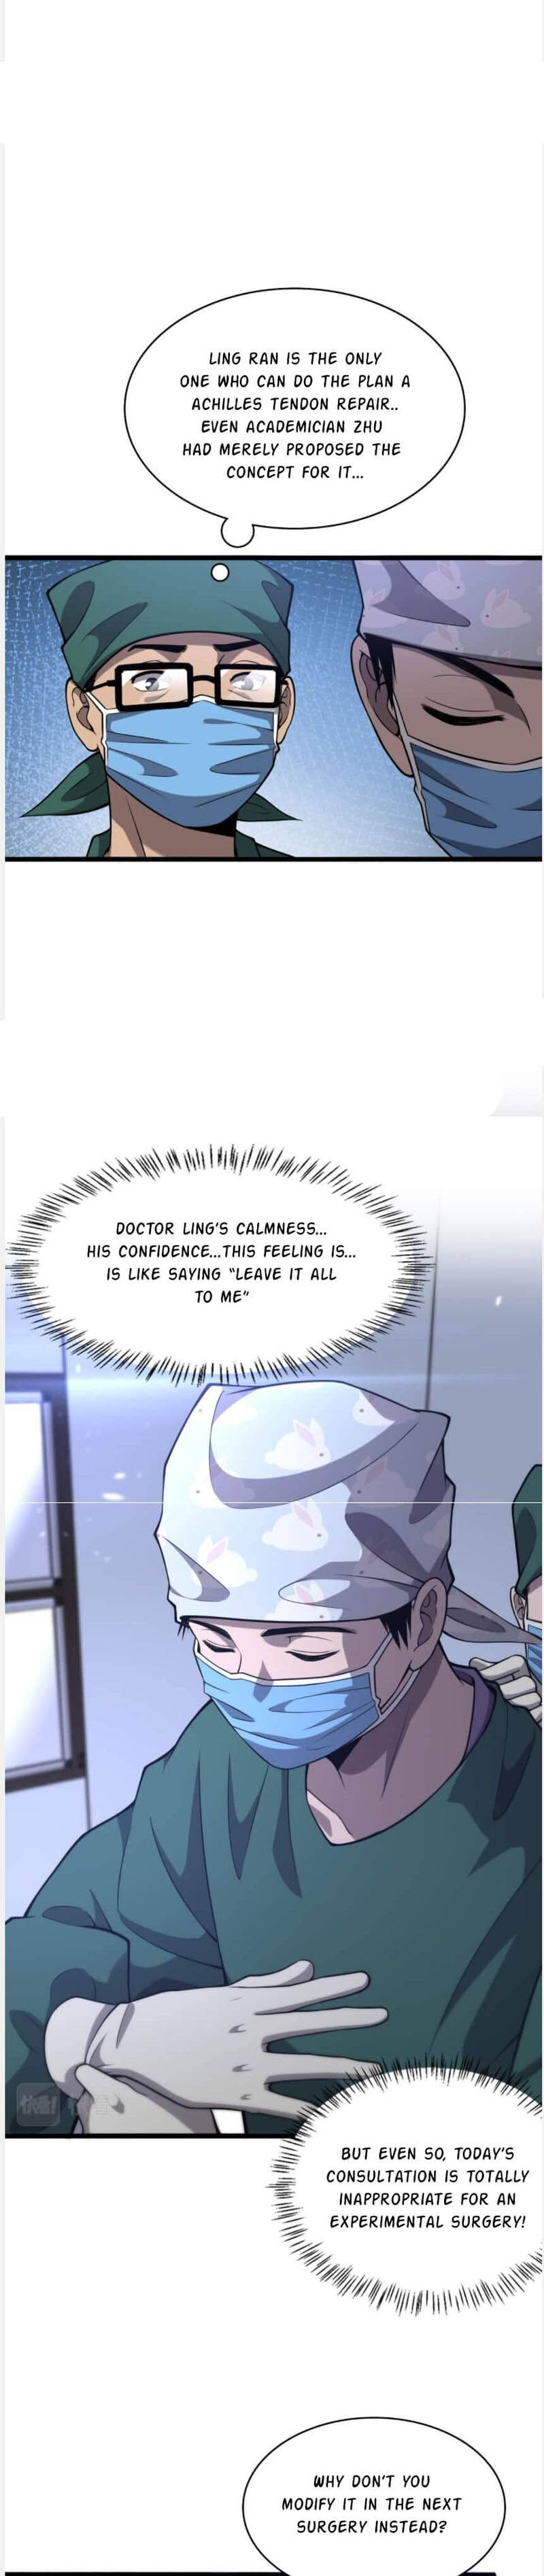 Great Doctor Ling Ran Chapter 113 Page 4